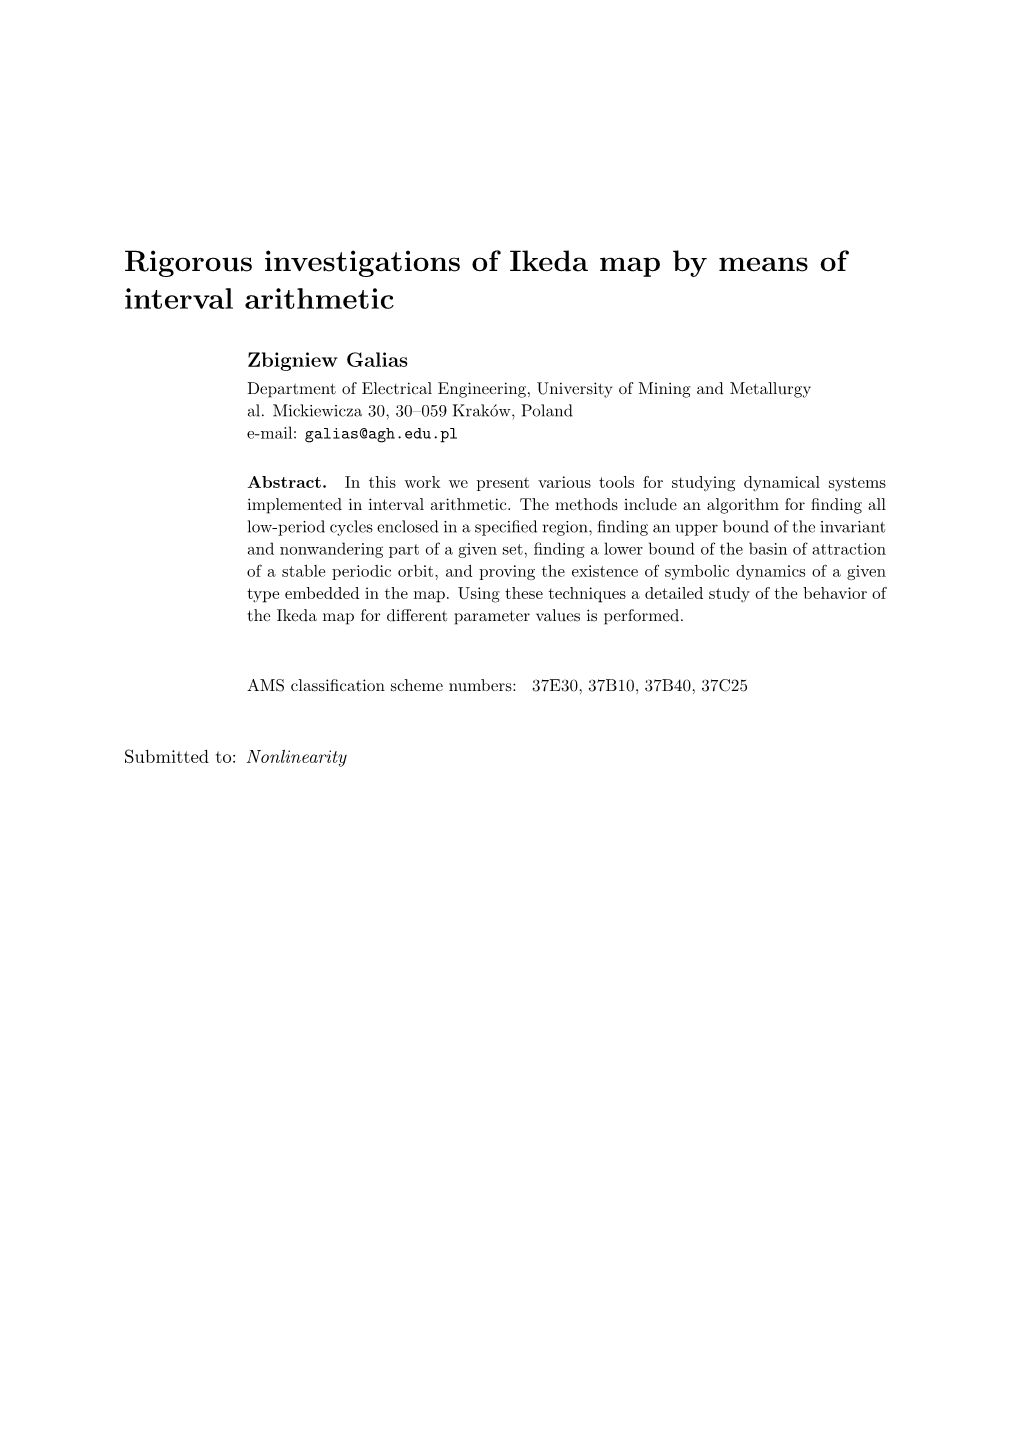 Rigorous Investigations of Ikeda Map by Means of Interval Arithmetic